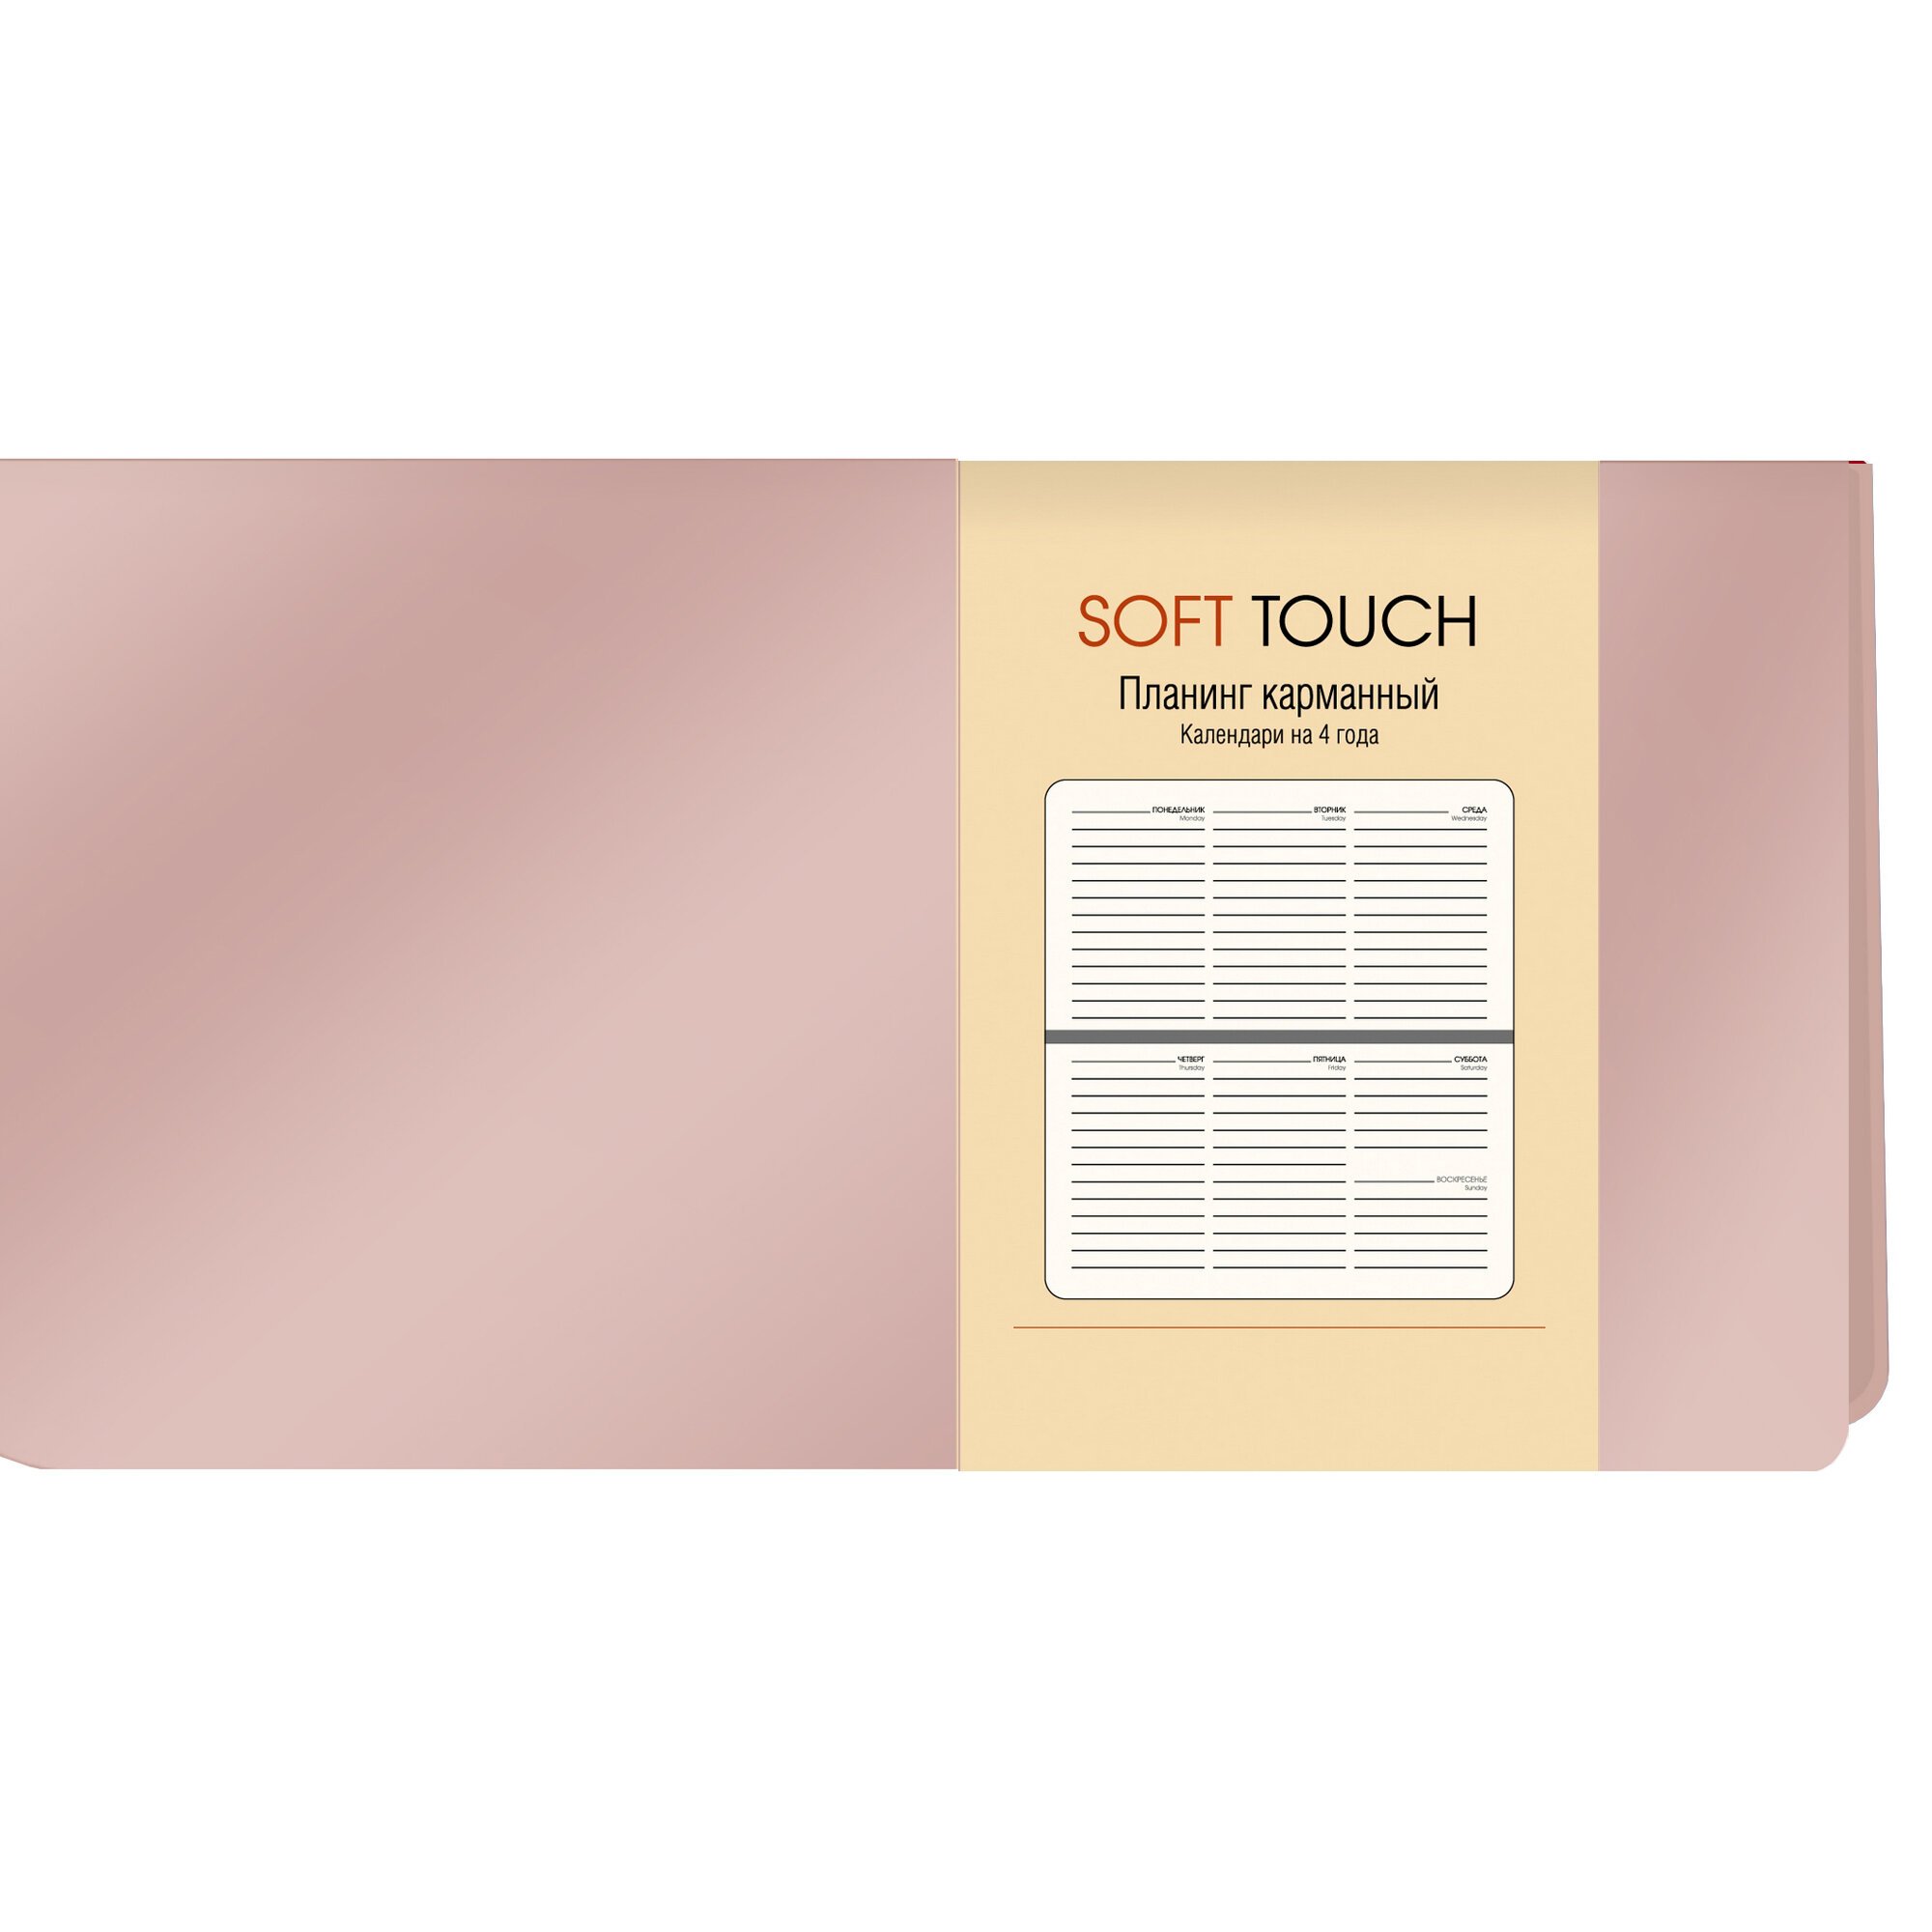 Soft Touch.  